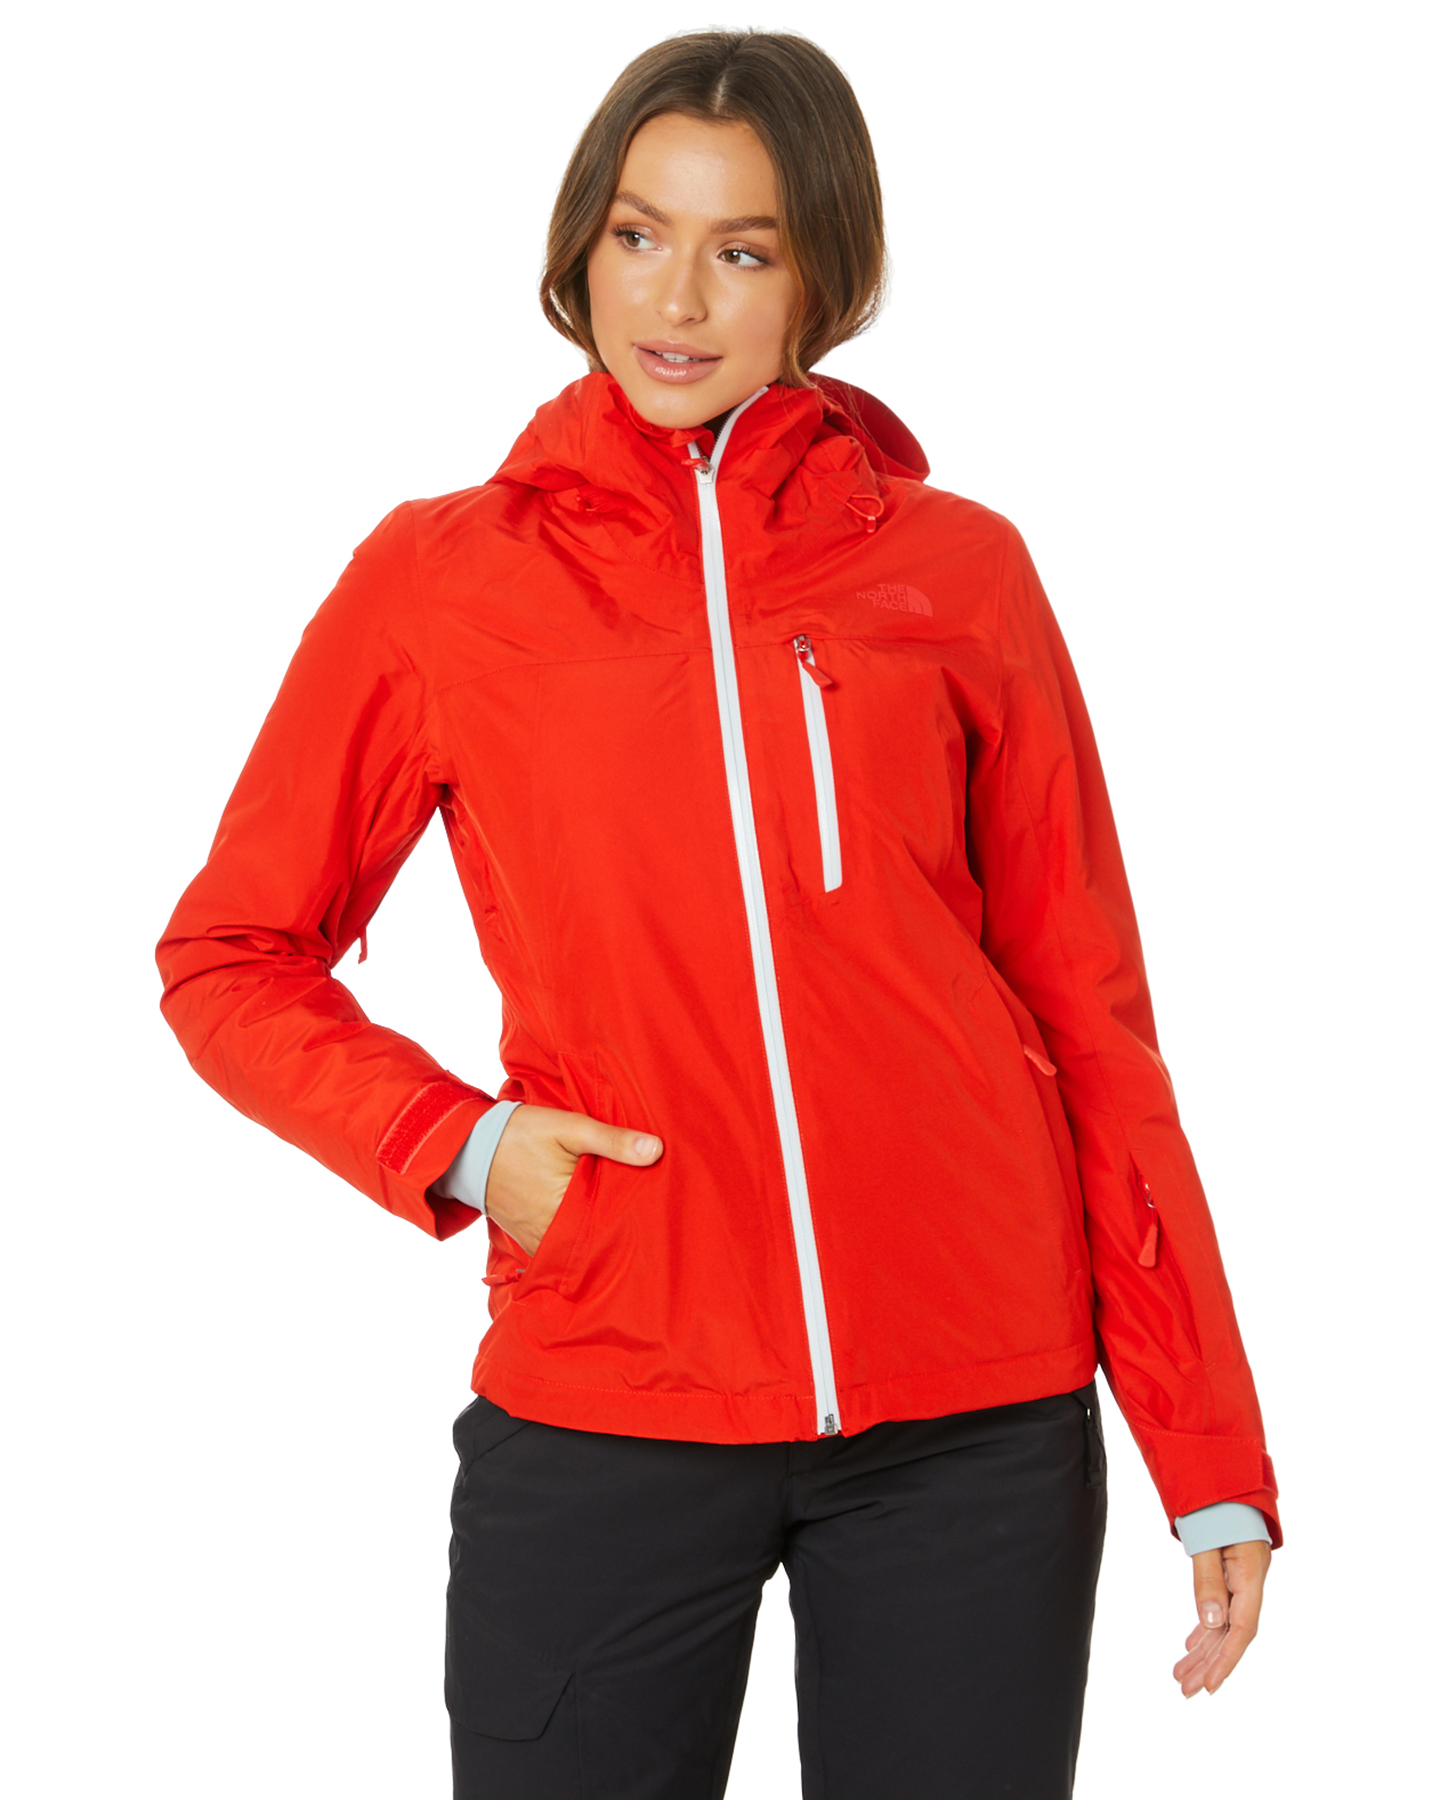 The North Face Womens Descendit Snow Jacket - Fiery Red | SurfStitch